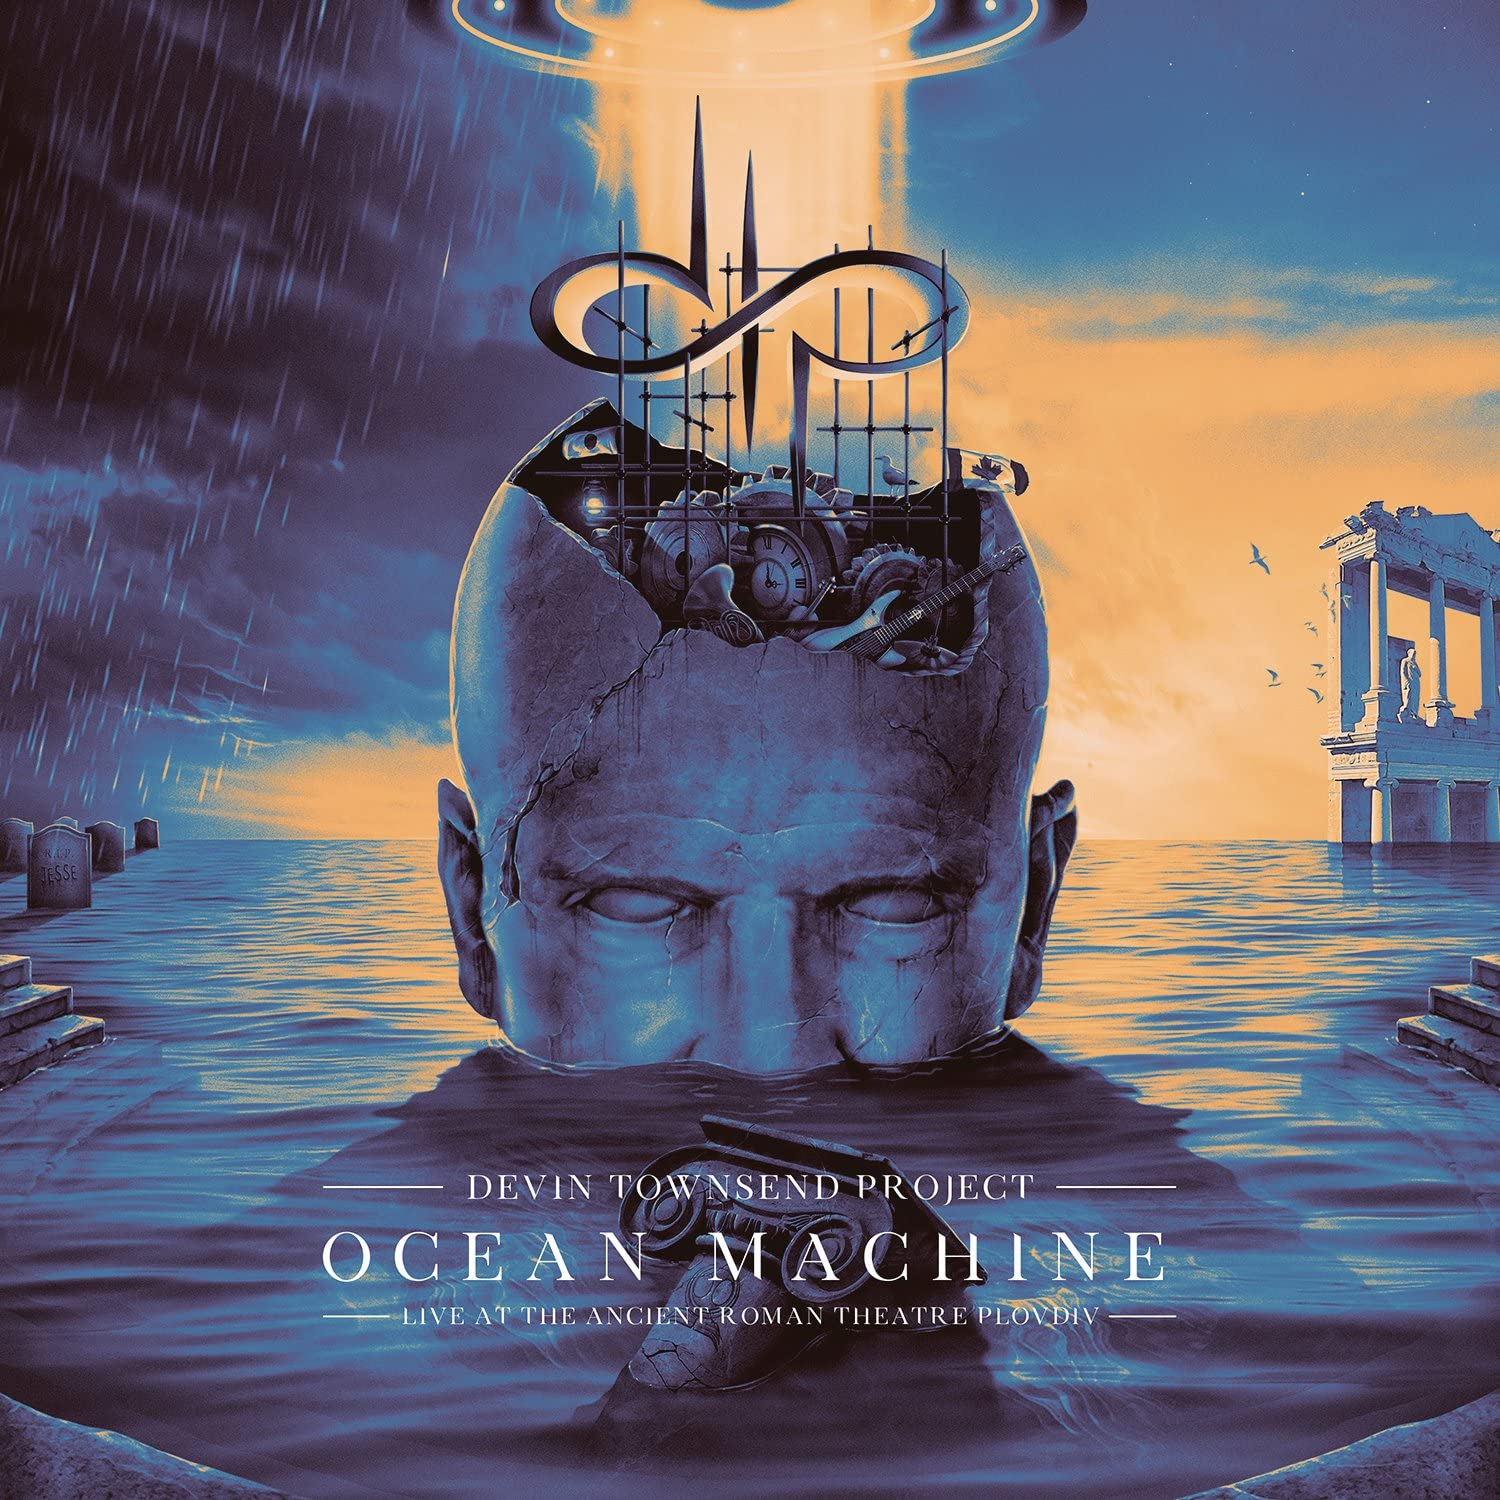 Ocean Machine - Live at the Ancient Roman Theatre Plovdiv - Blu Ray Disc | Devin Townsend Project